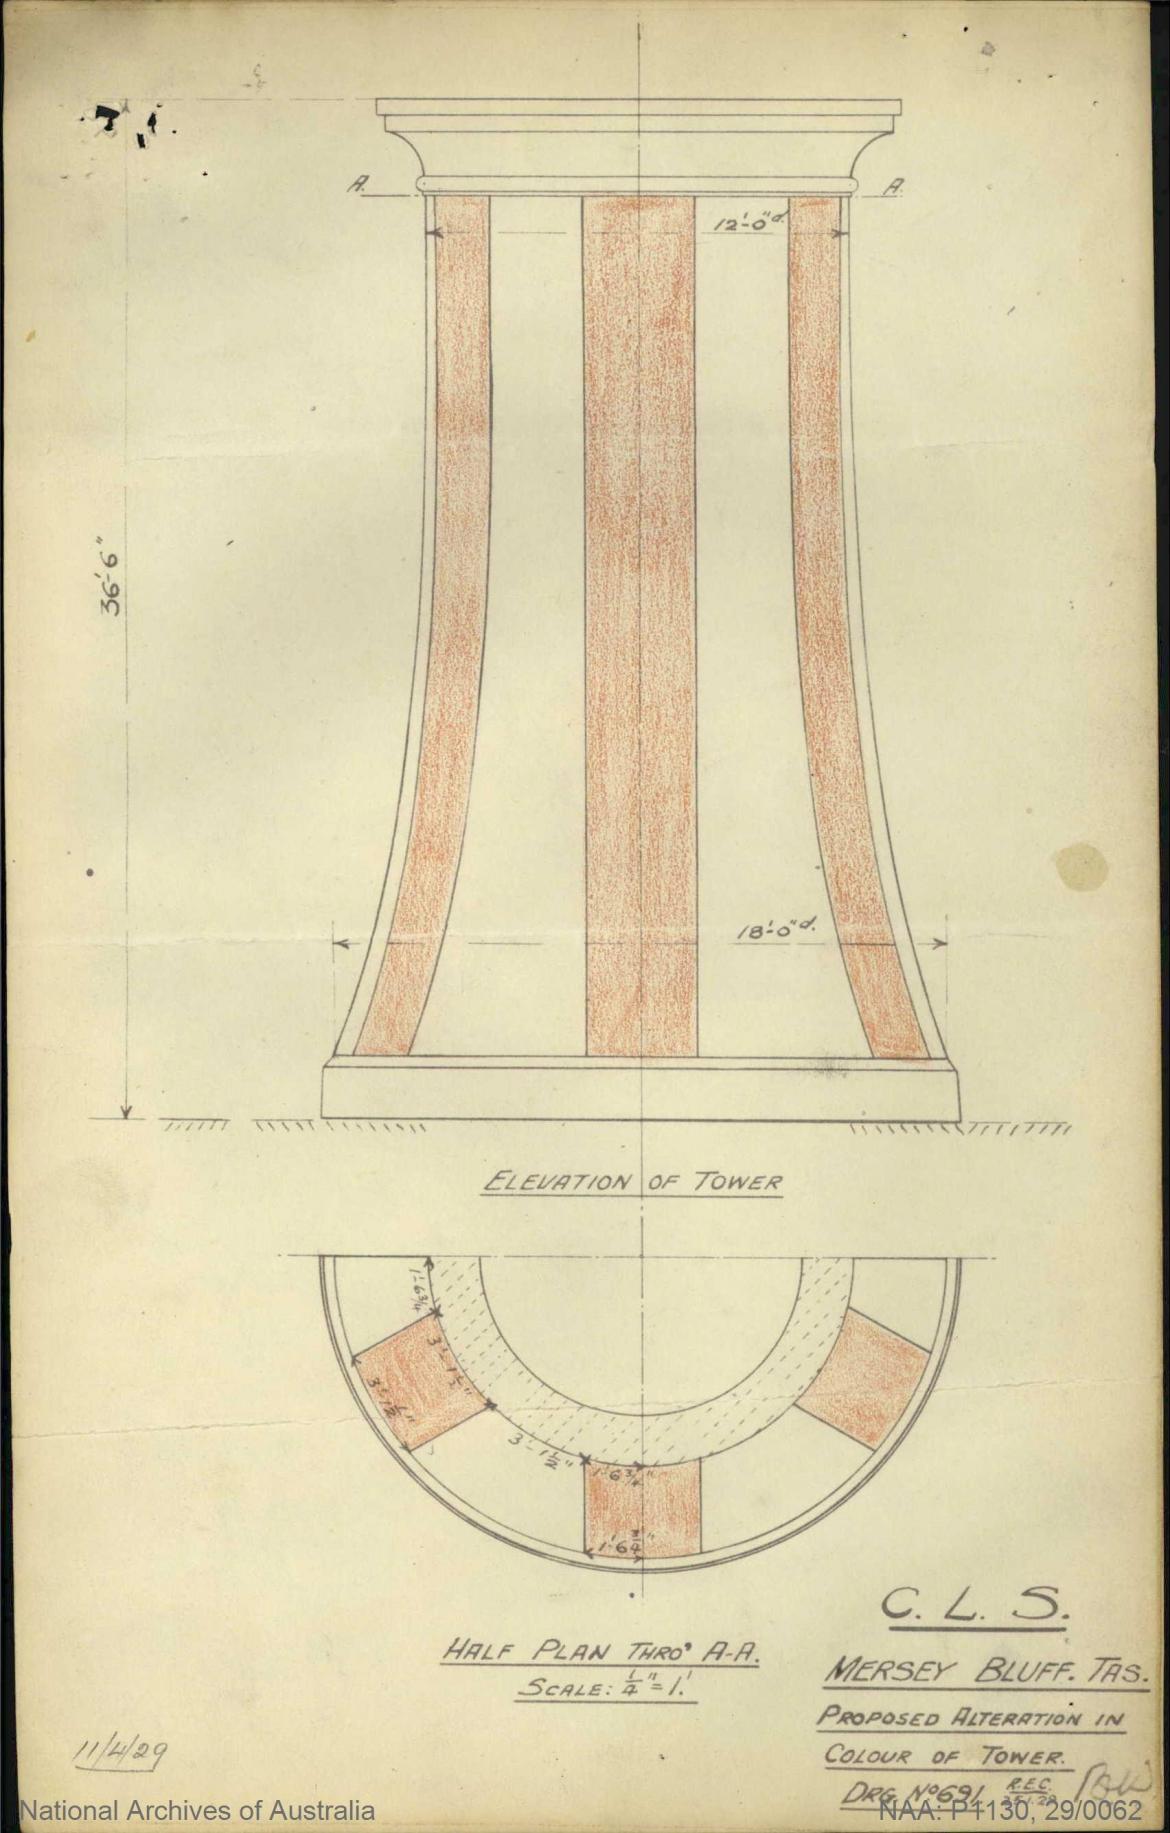 Figure 13. Proposed alteration in colour of tower, CLS 1929. NAA: P1130, 29/0062 (© Commonwealth of Australia, National Archives of Australia)